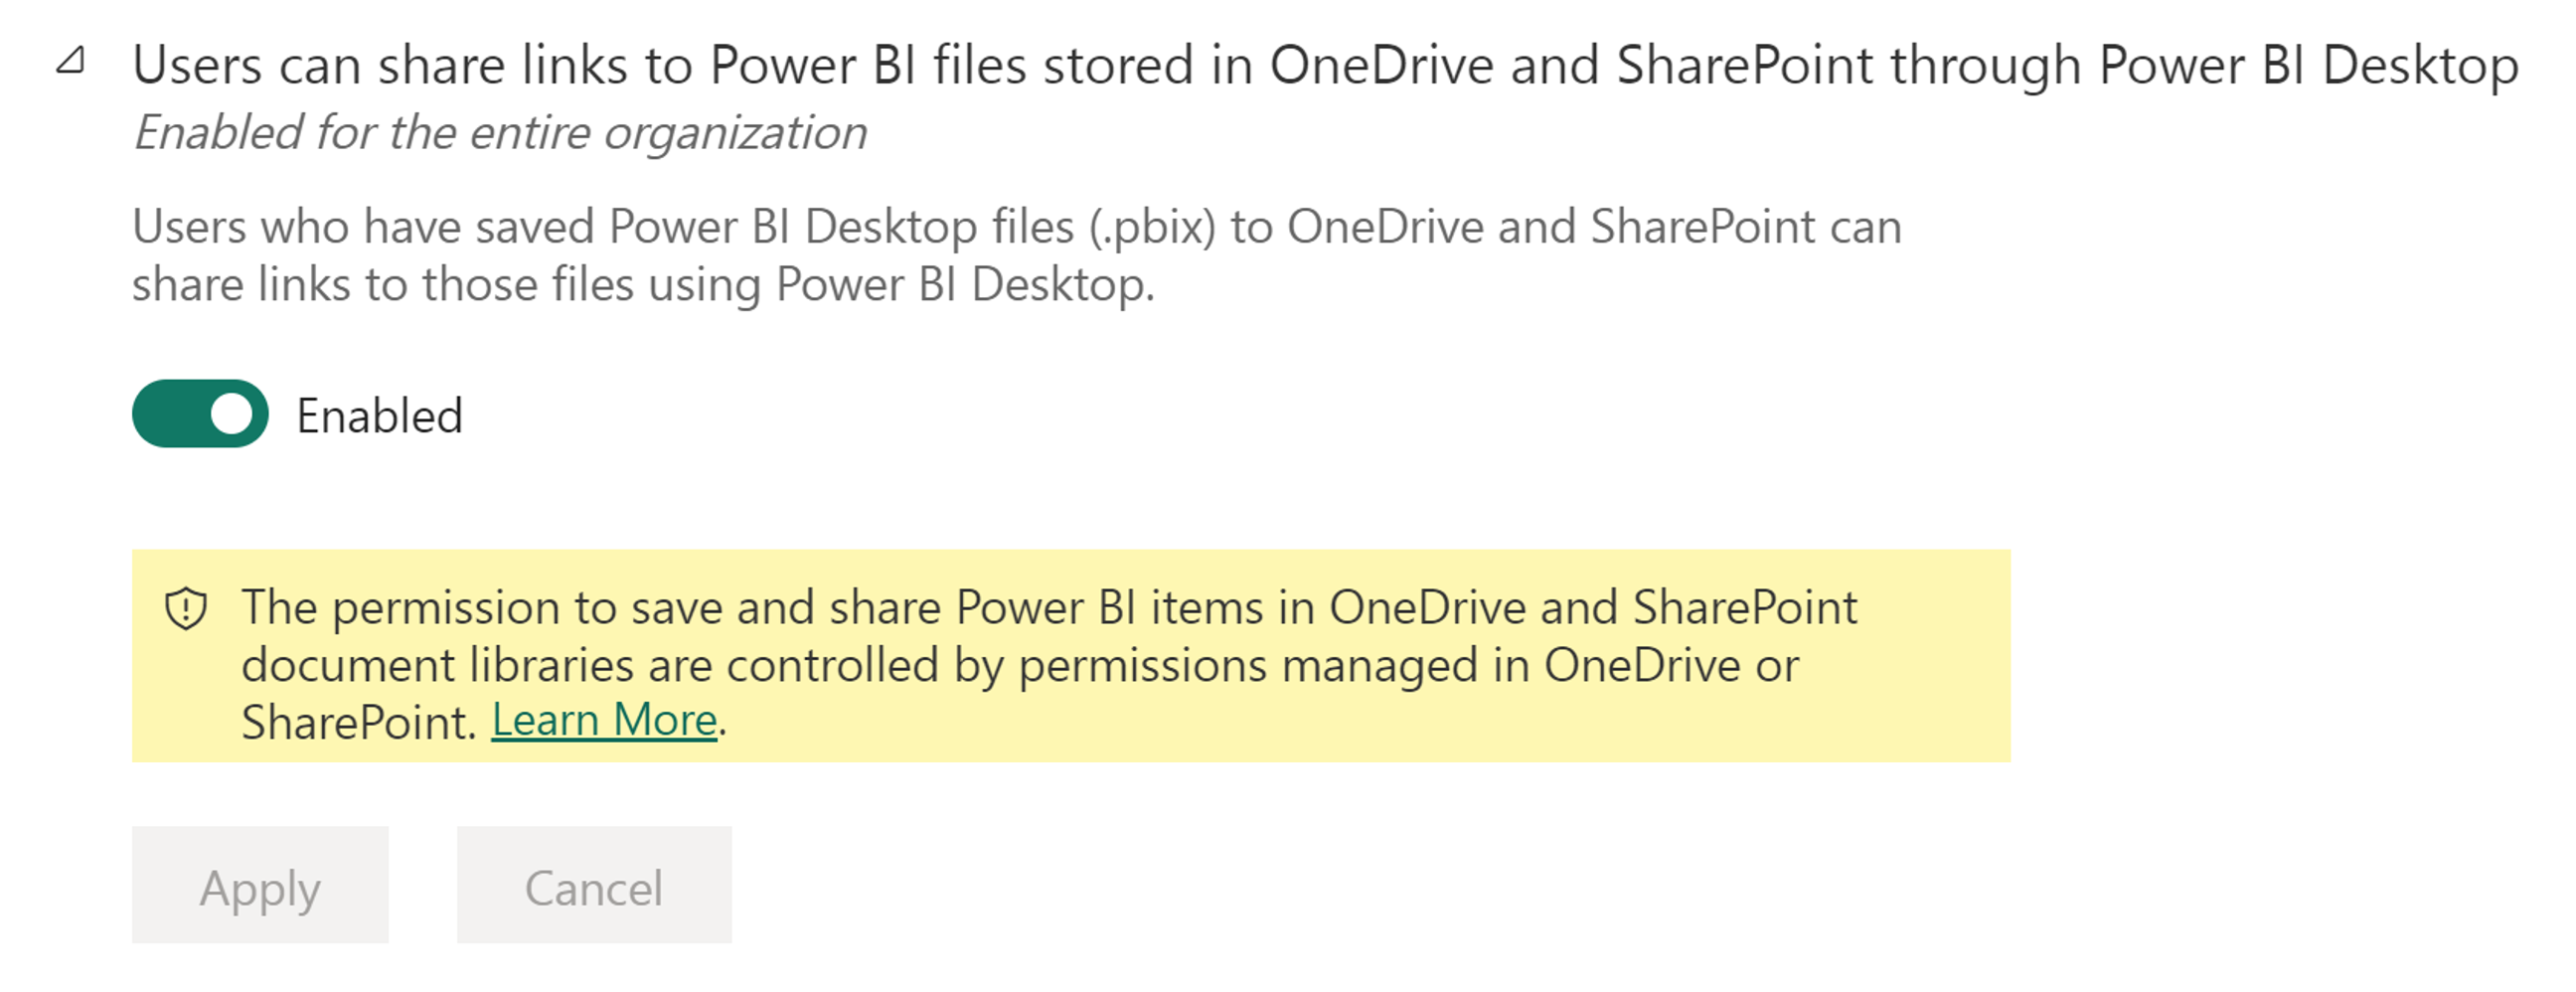 Screenshot of admin setting called Users can share links to Power BI files stored in OneDrive and SharePoint through Power BI Desktop.